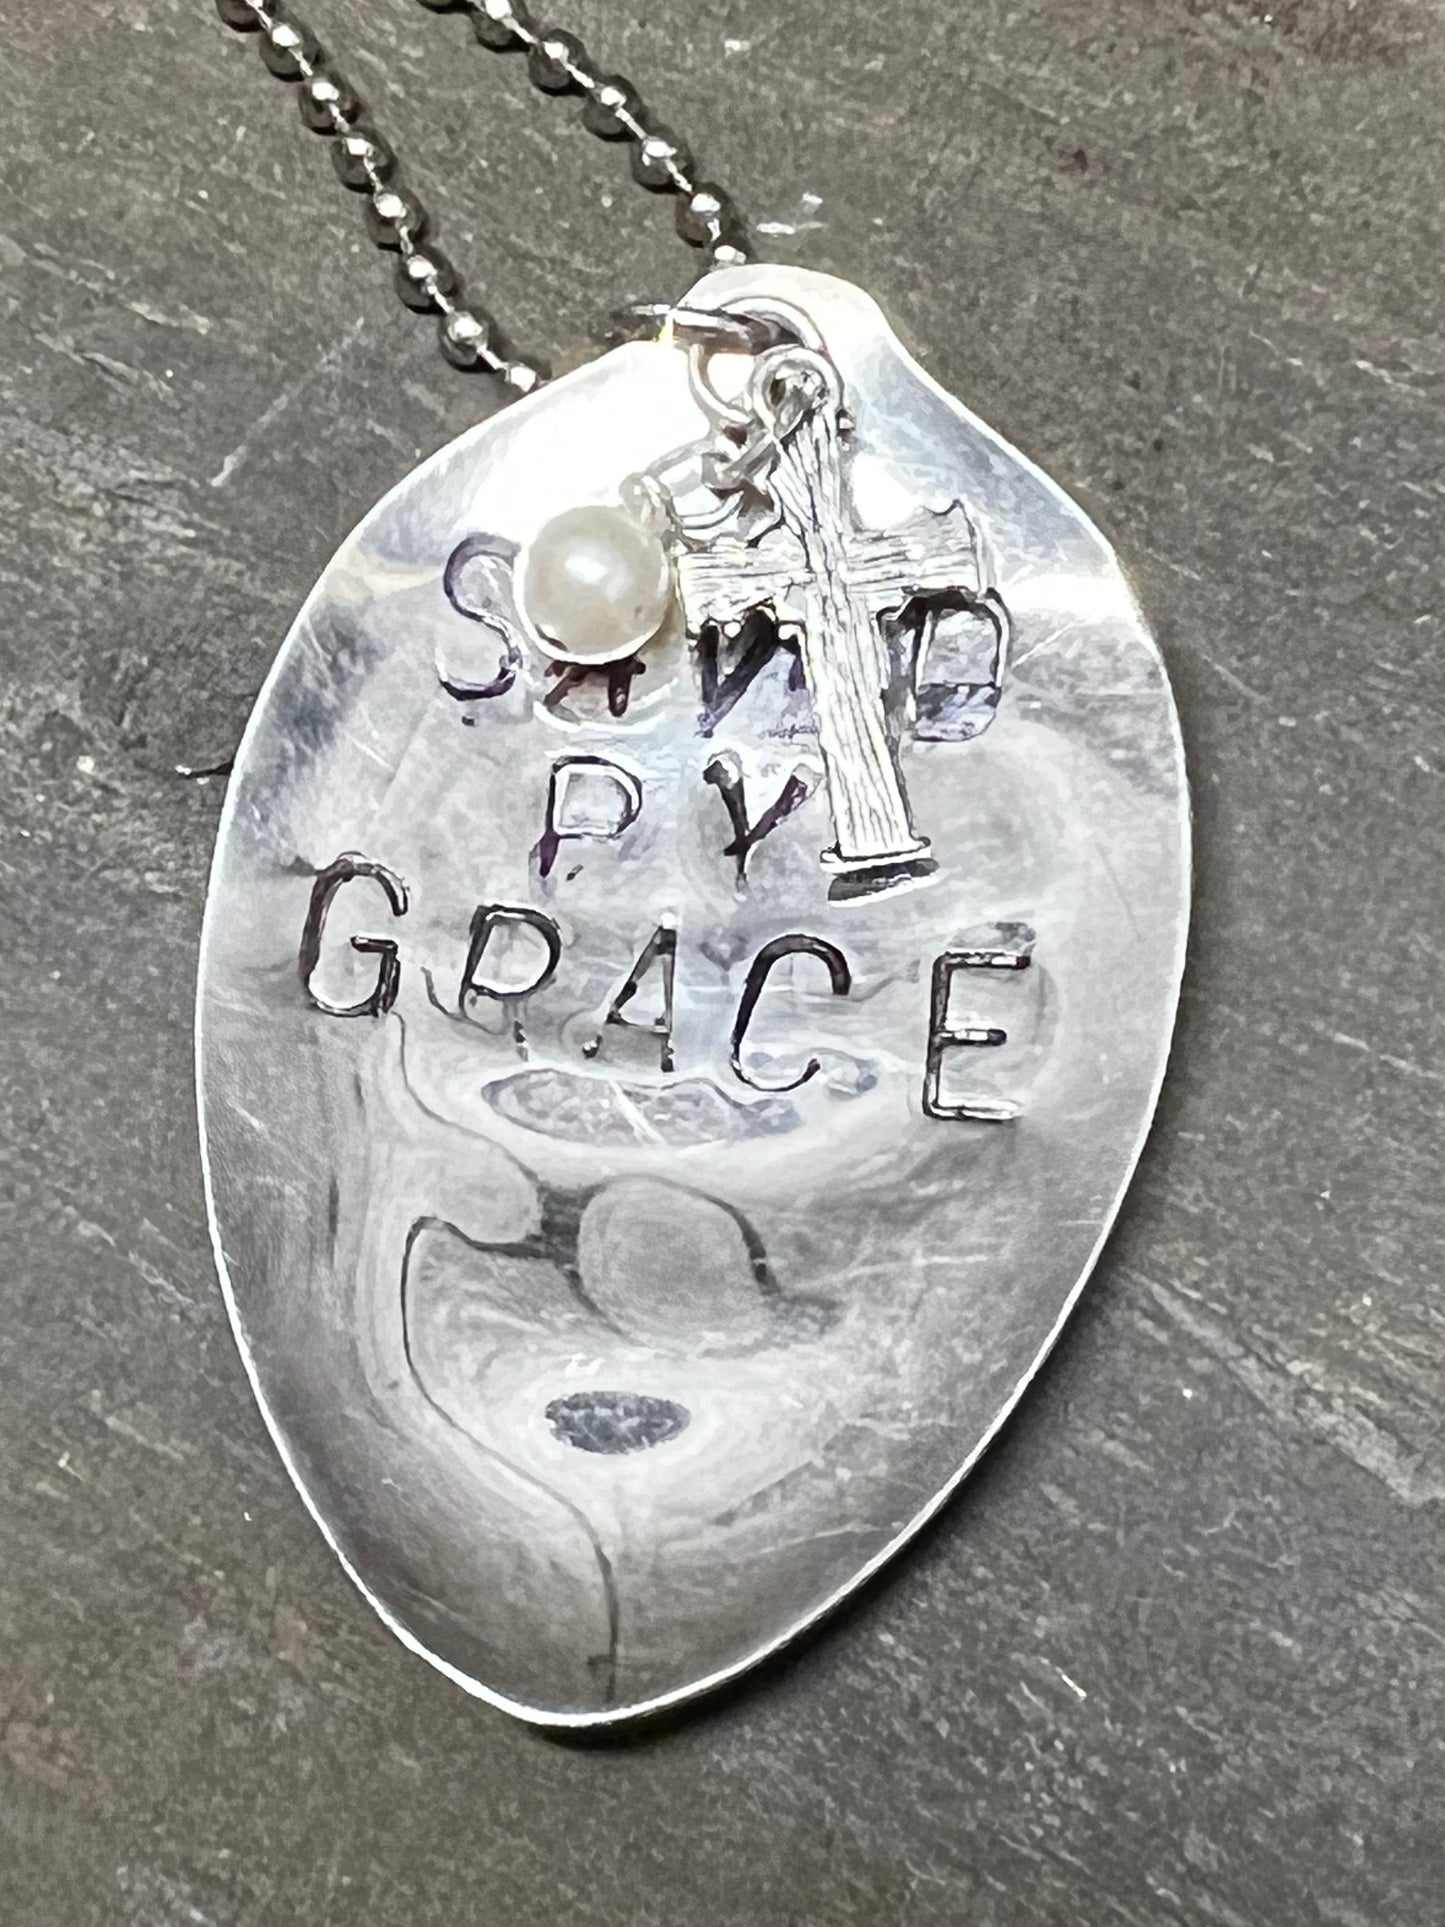 Necklace, Ball Chain W/Charms, SAVED BY GRACE